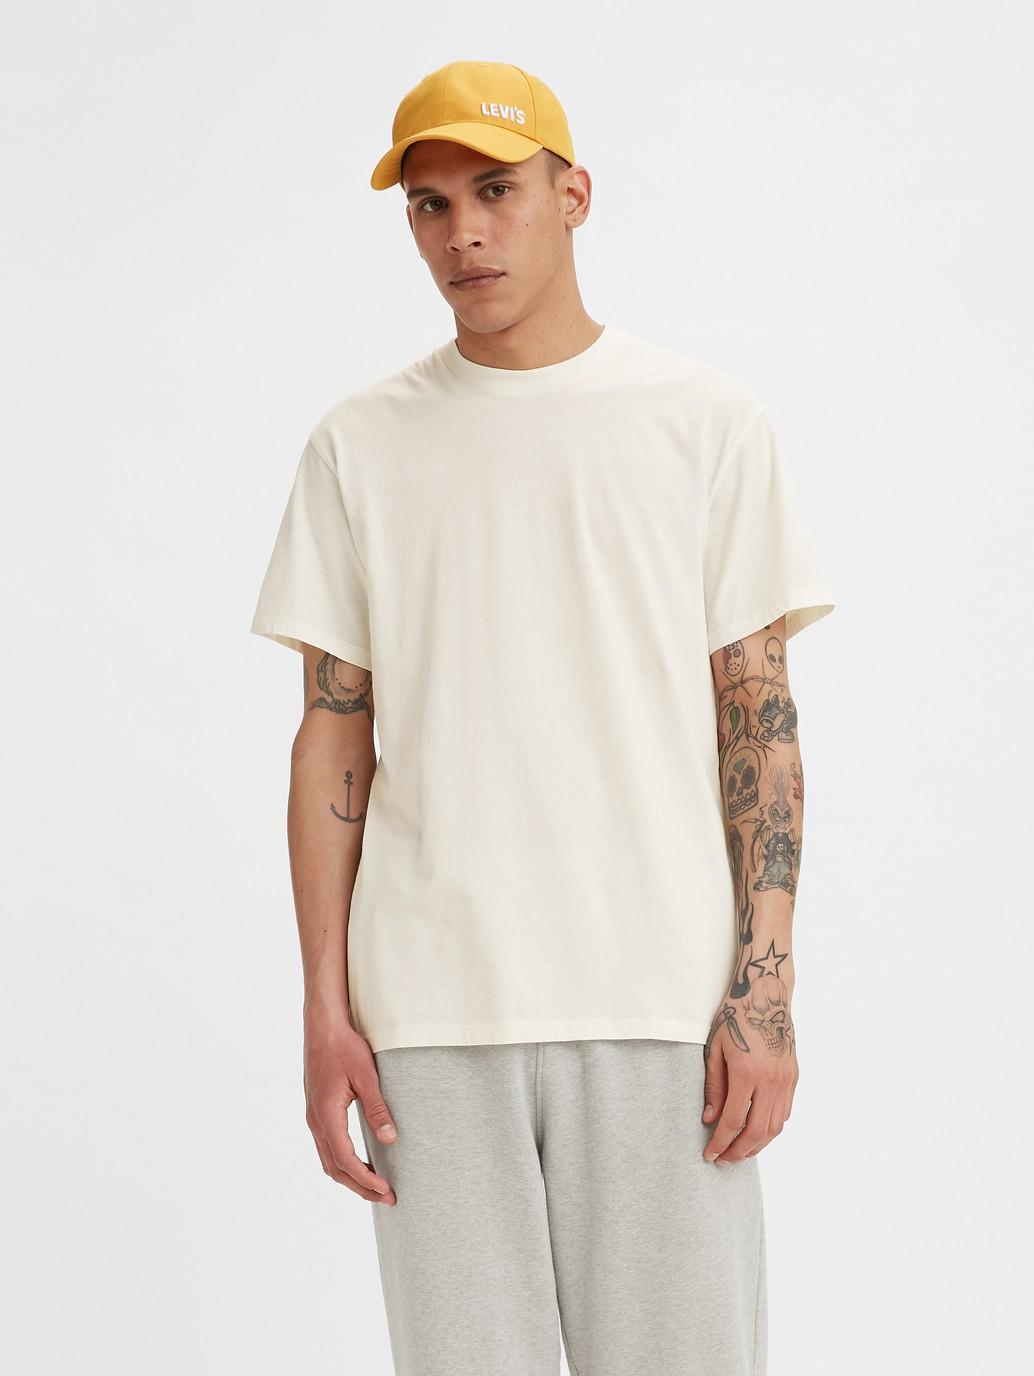 Buy Levi's® Gold Tab™ Men's Tee | Levi's® Official Online Store MY